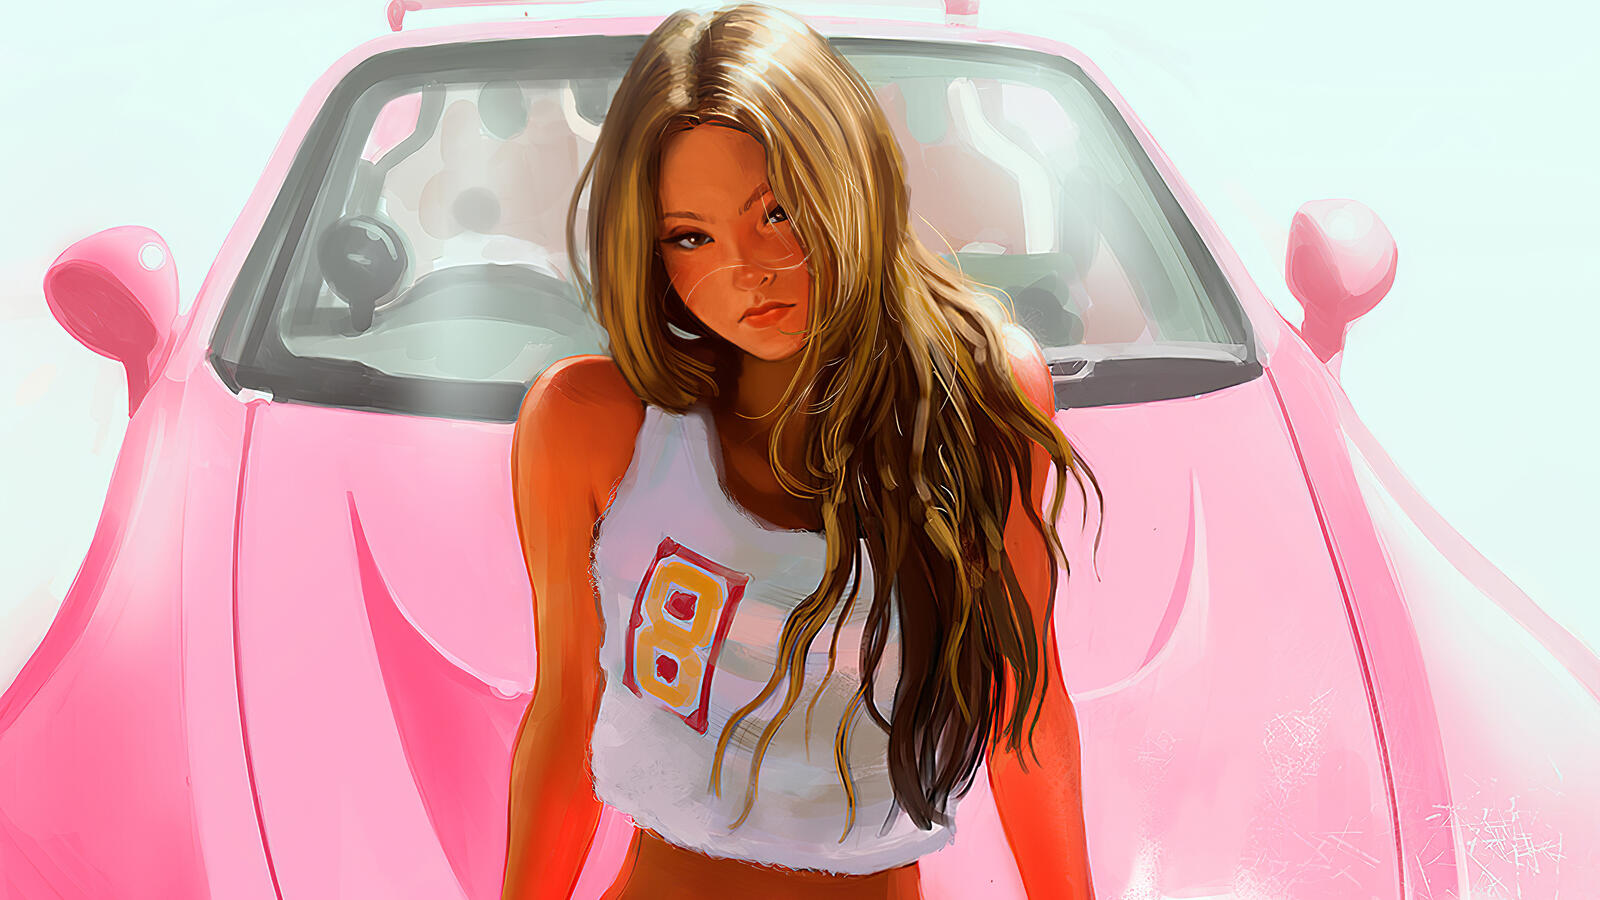 Free photo Drawing of the girl from the afterburner Devon Aoki against the background of the pink car